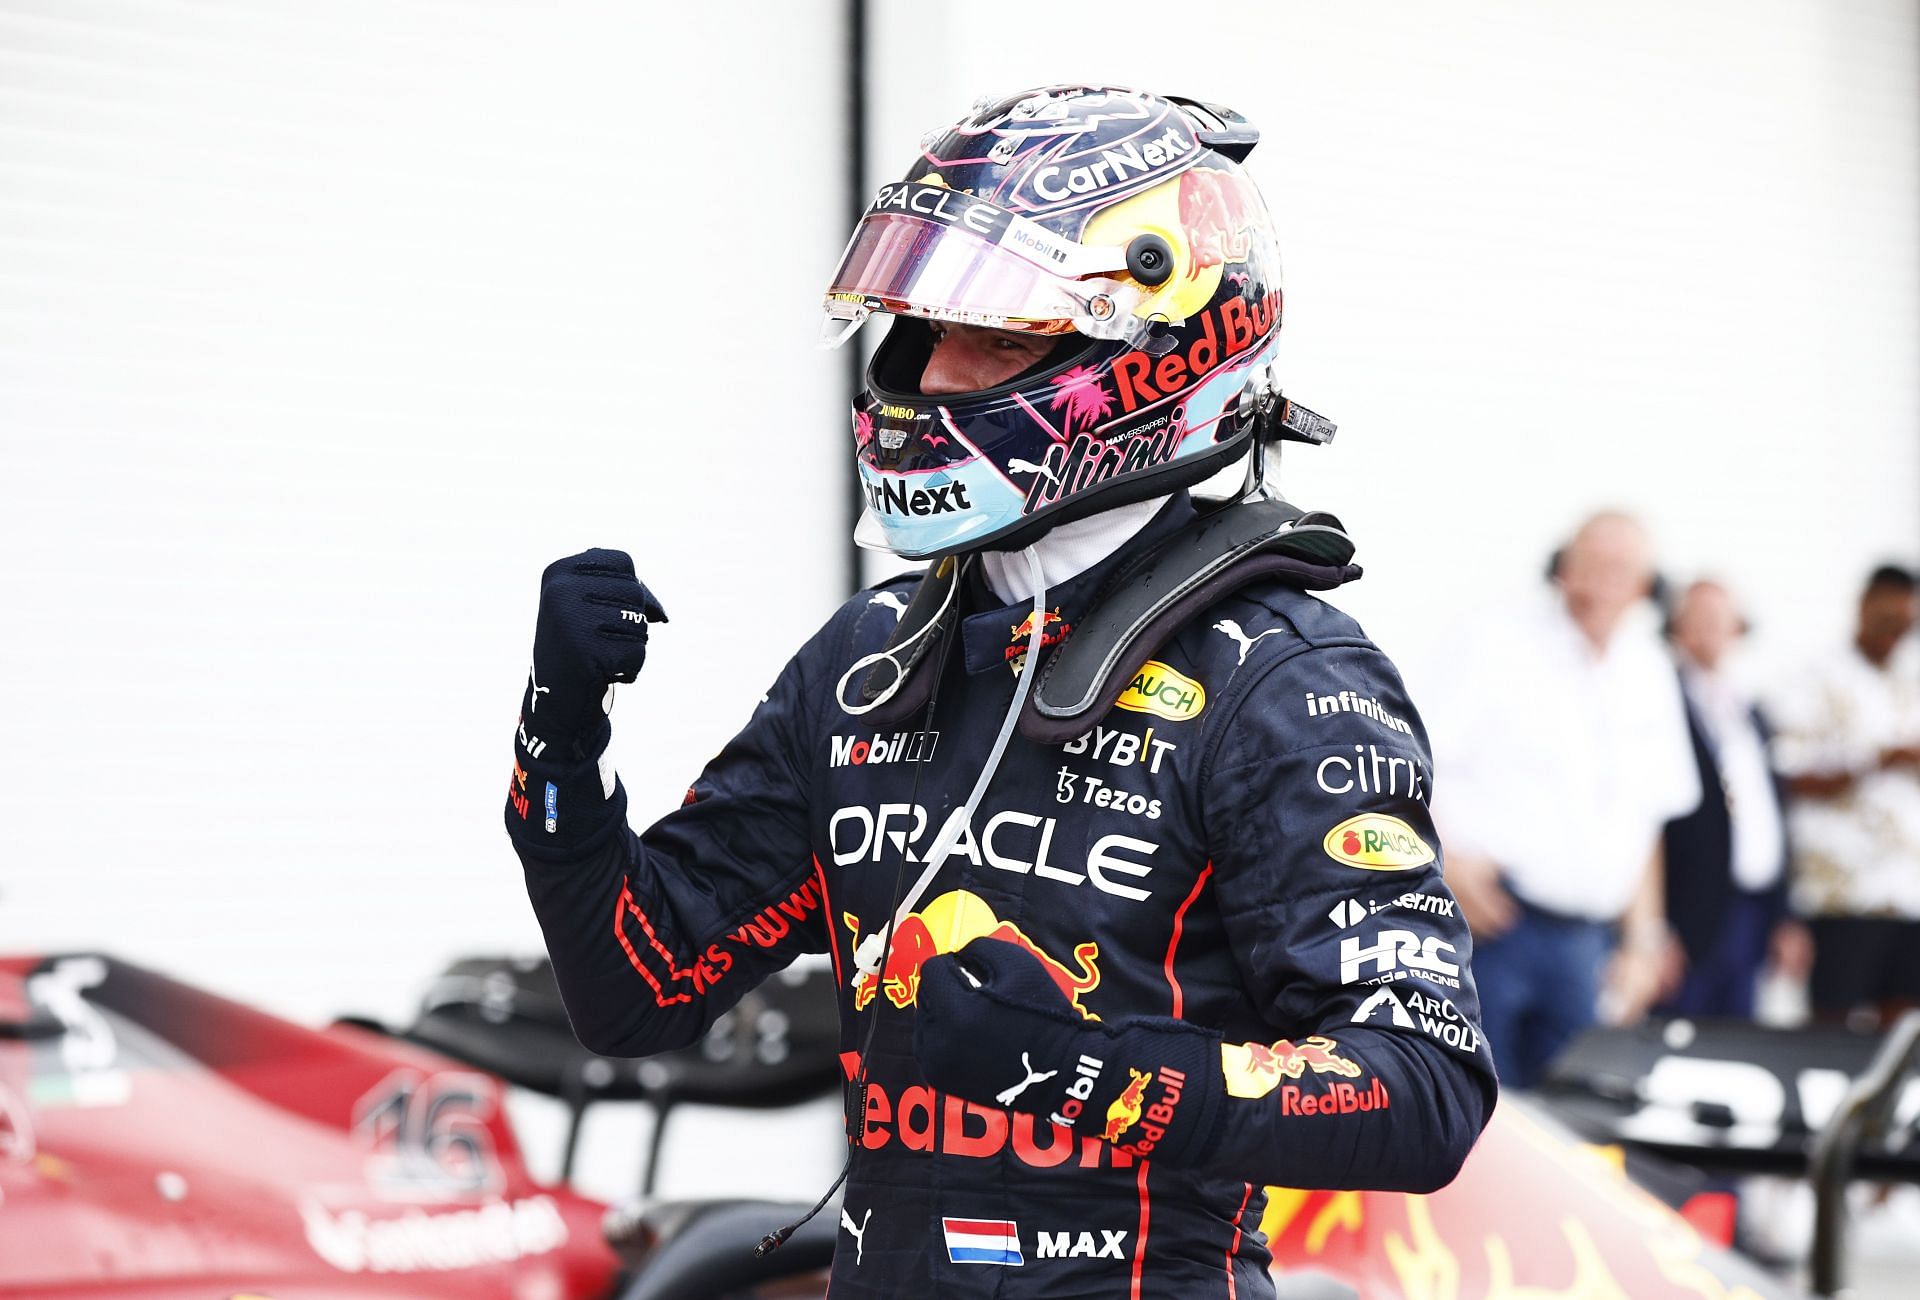 Max Verstappen was the class of the field in Miami